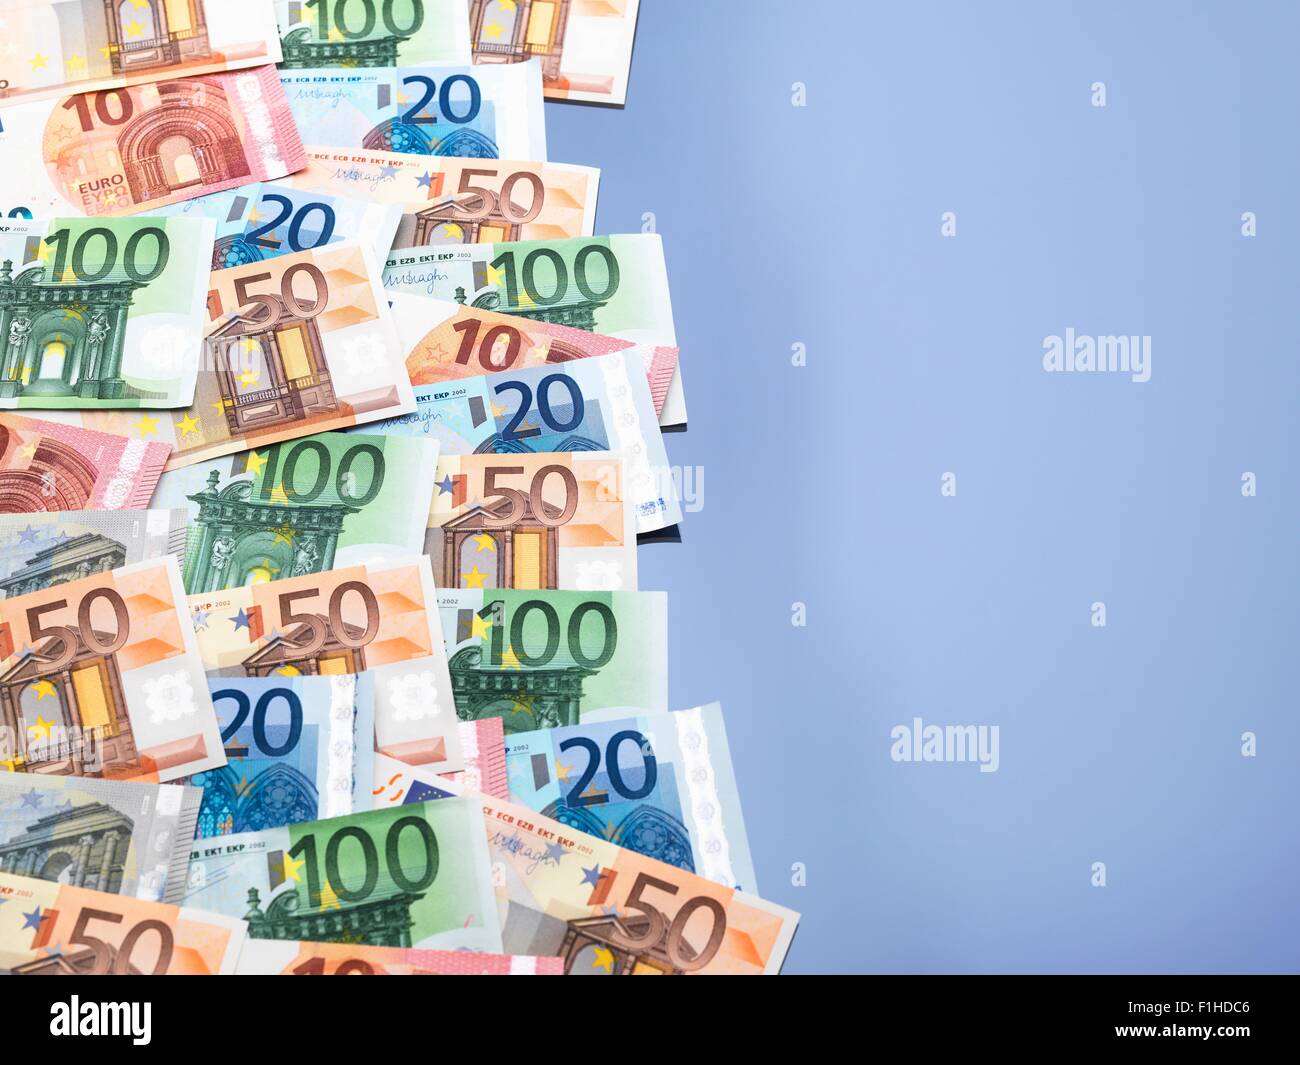 Euro currency notes Stock Photo